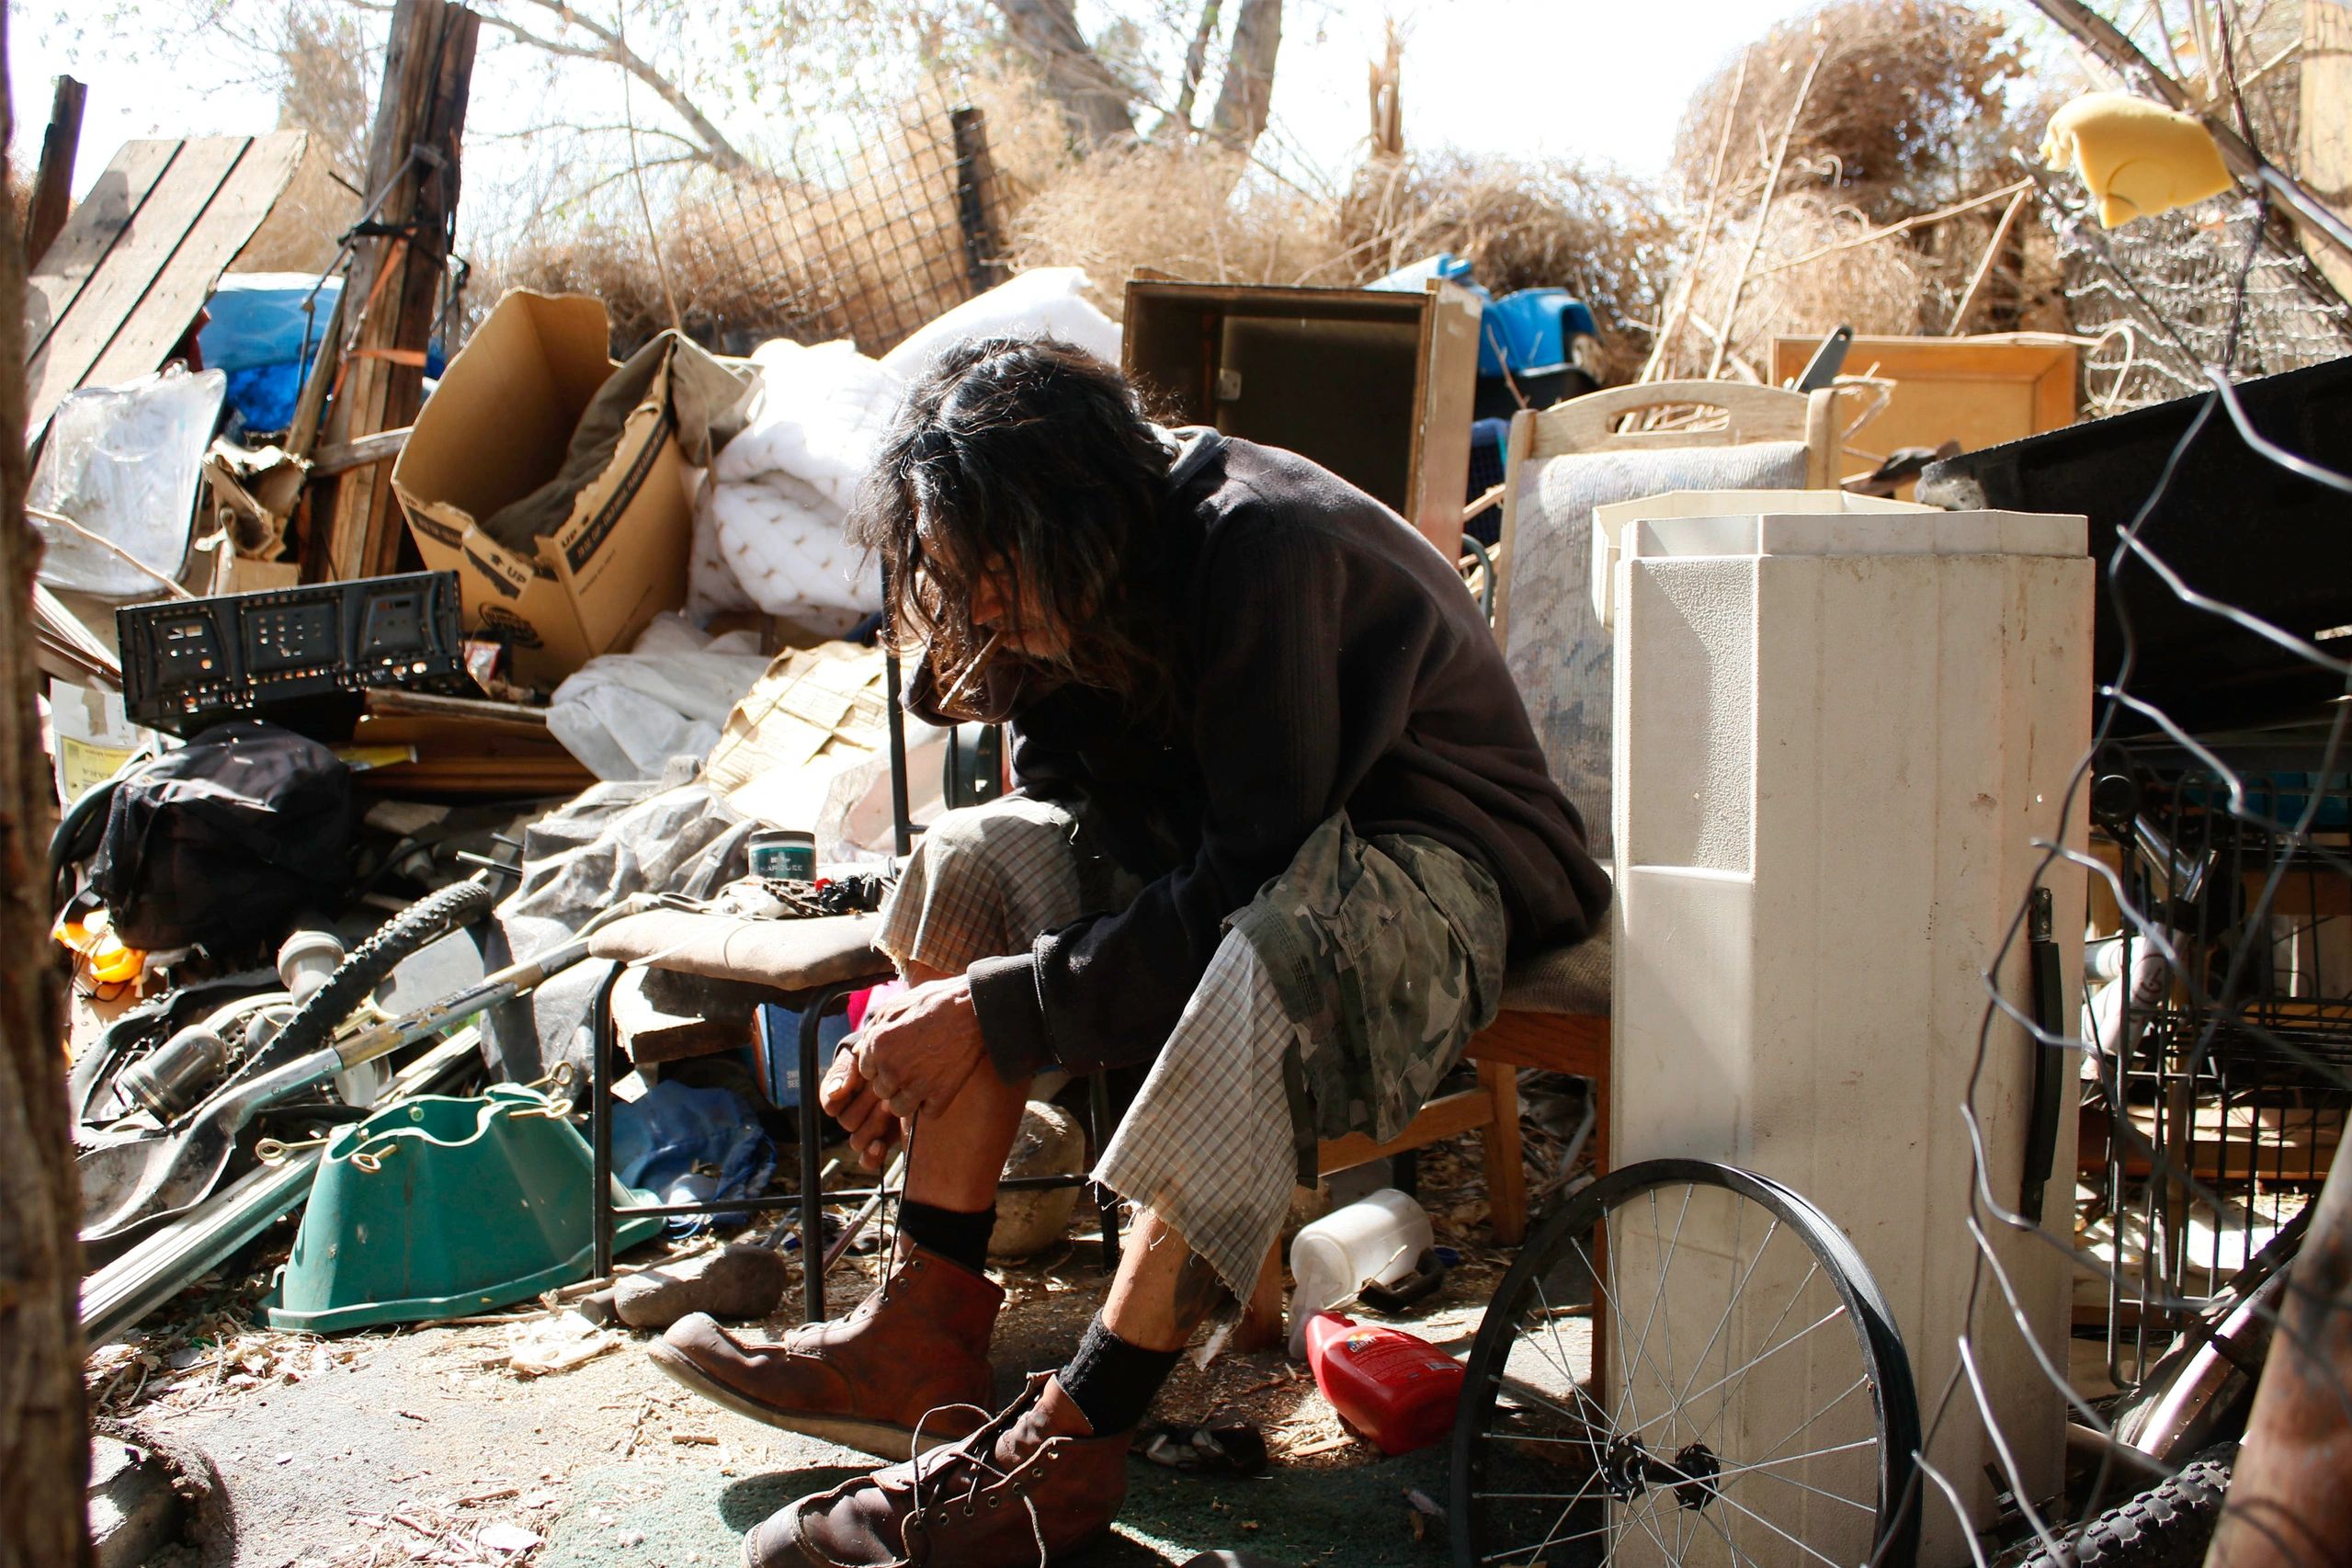 Homeless Native American man ties his shoes in his camp in Apple Valley CA.